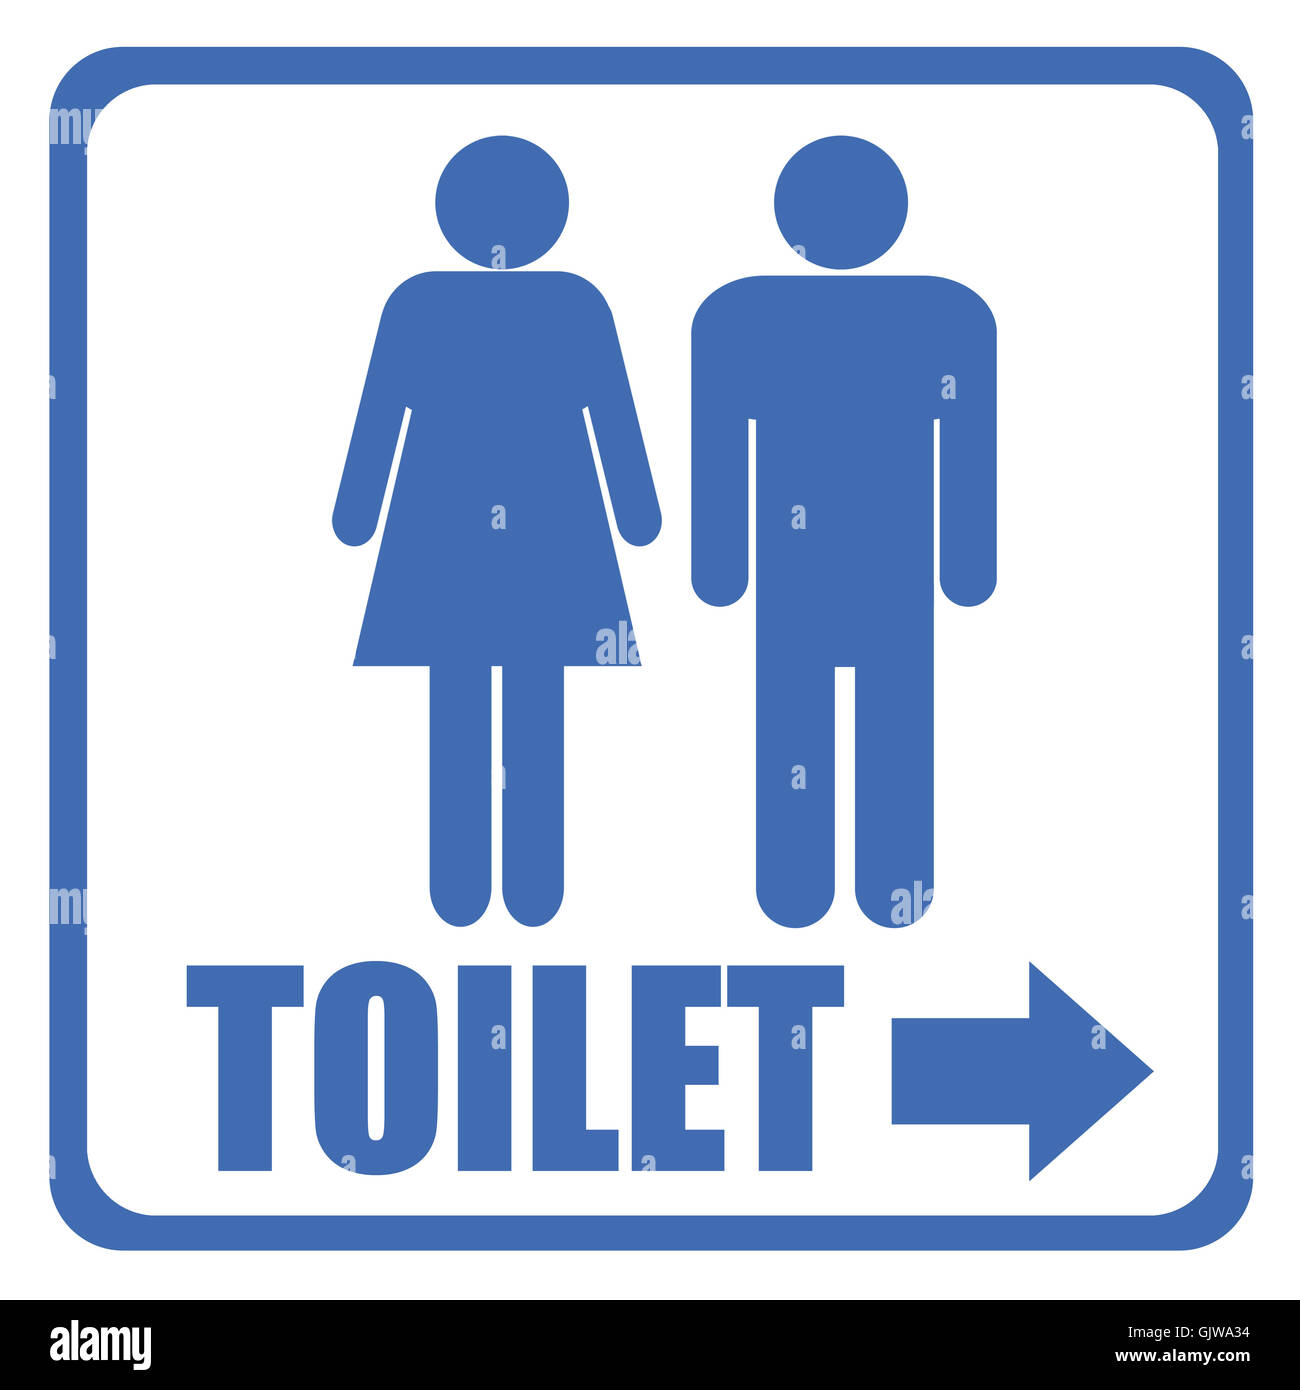 Toilets With Logos and Directional Arrow Sign 263mm x 93mm Printed In Blue